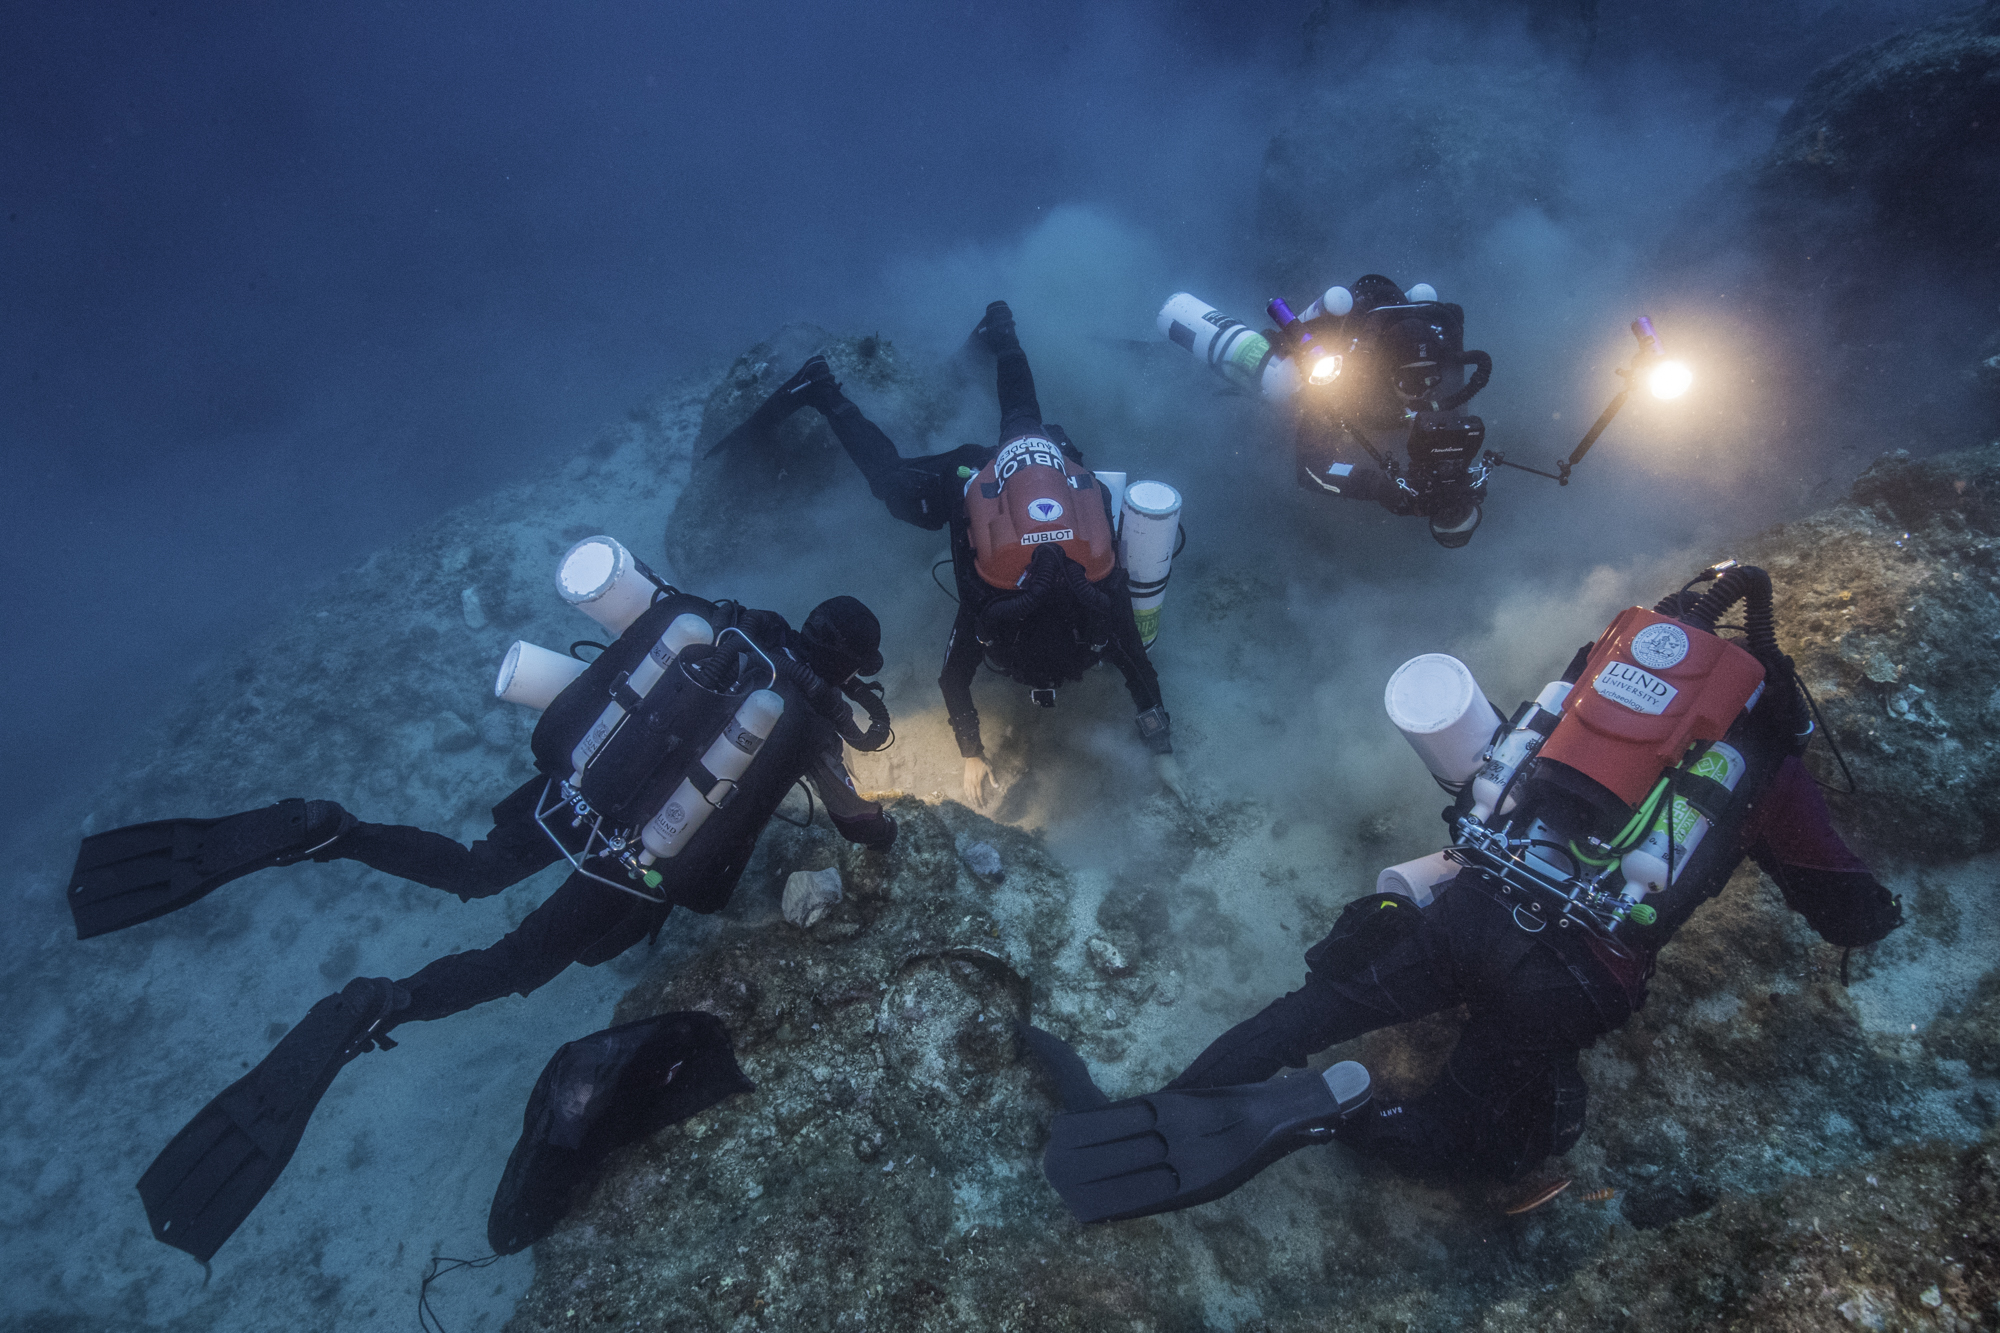 There May Be Seven Incredibly Rare Bronze Statues Buried At The Antikythera Shipwreck